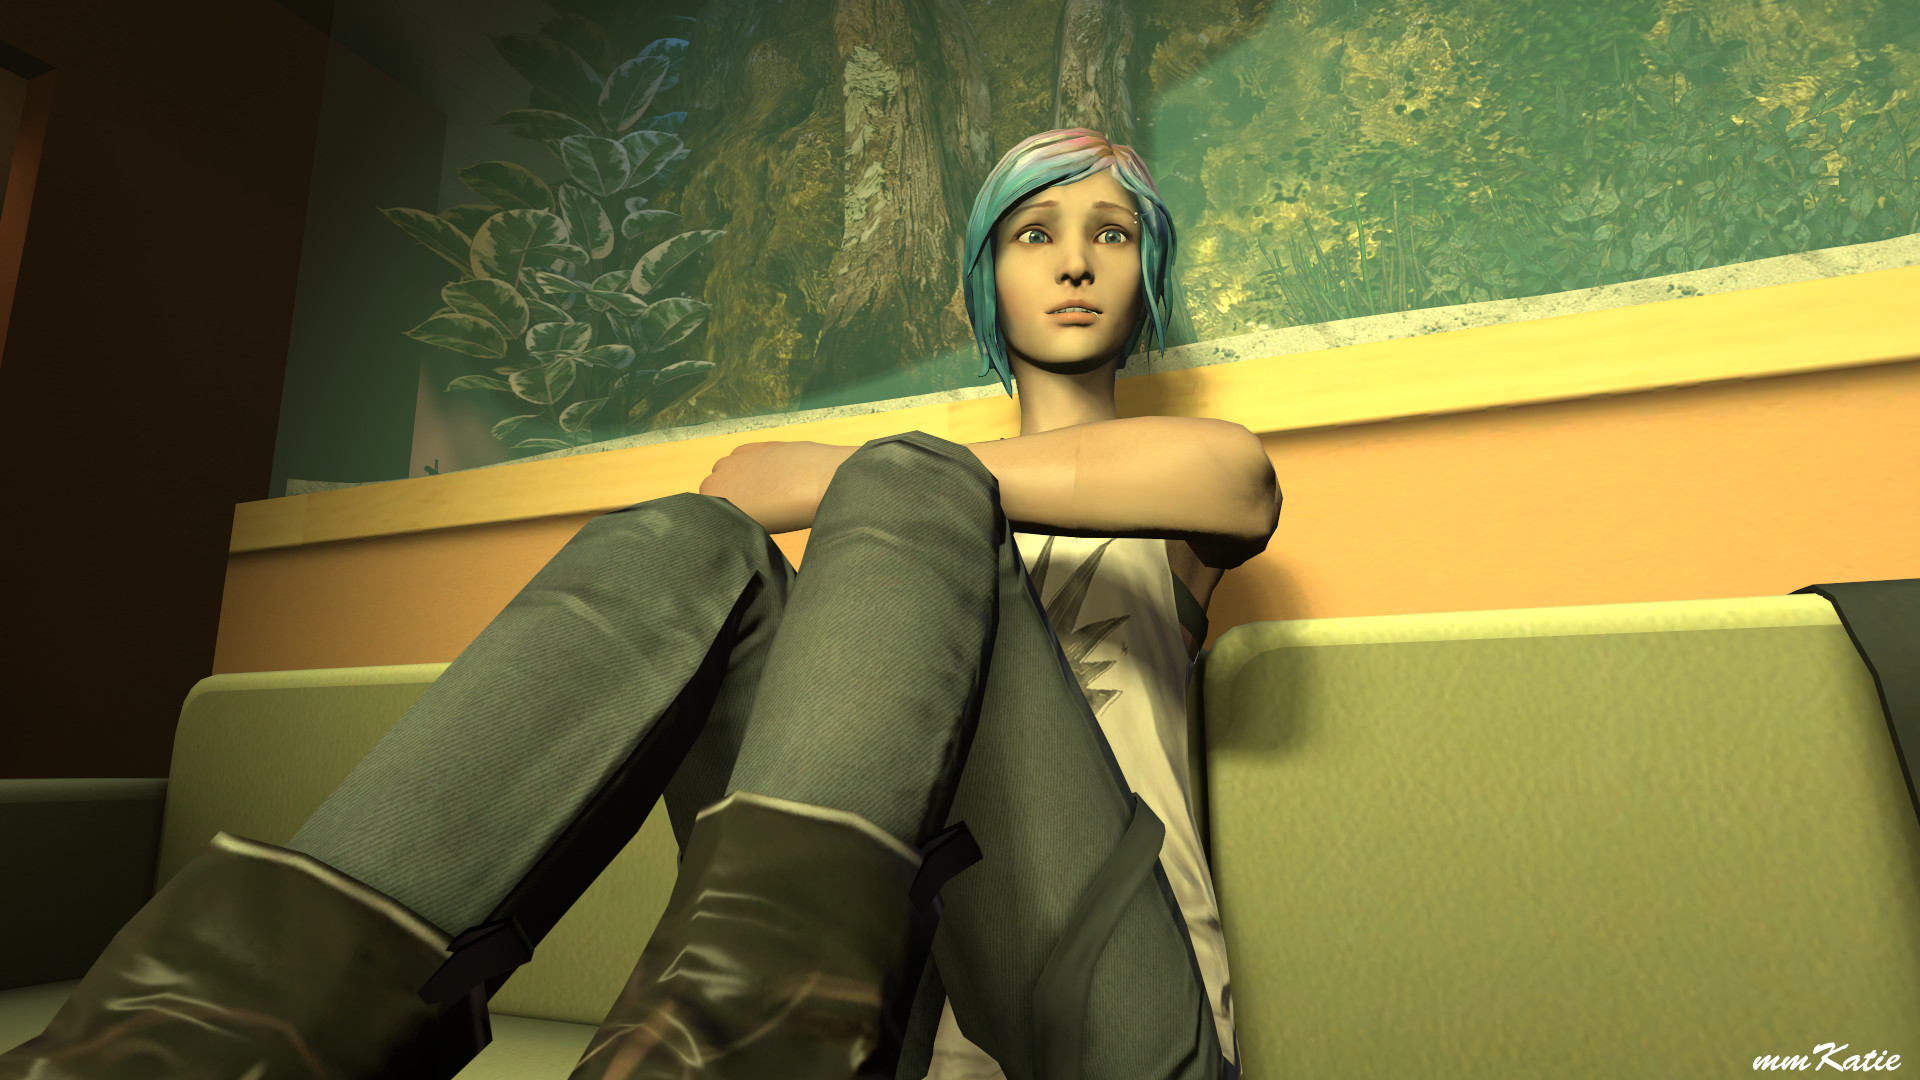 1920x1080 ... Chloe Price Wallpaper (different angle) by mmKatie